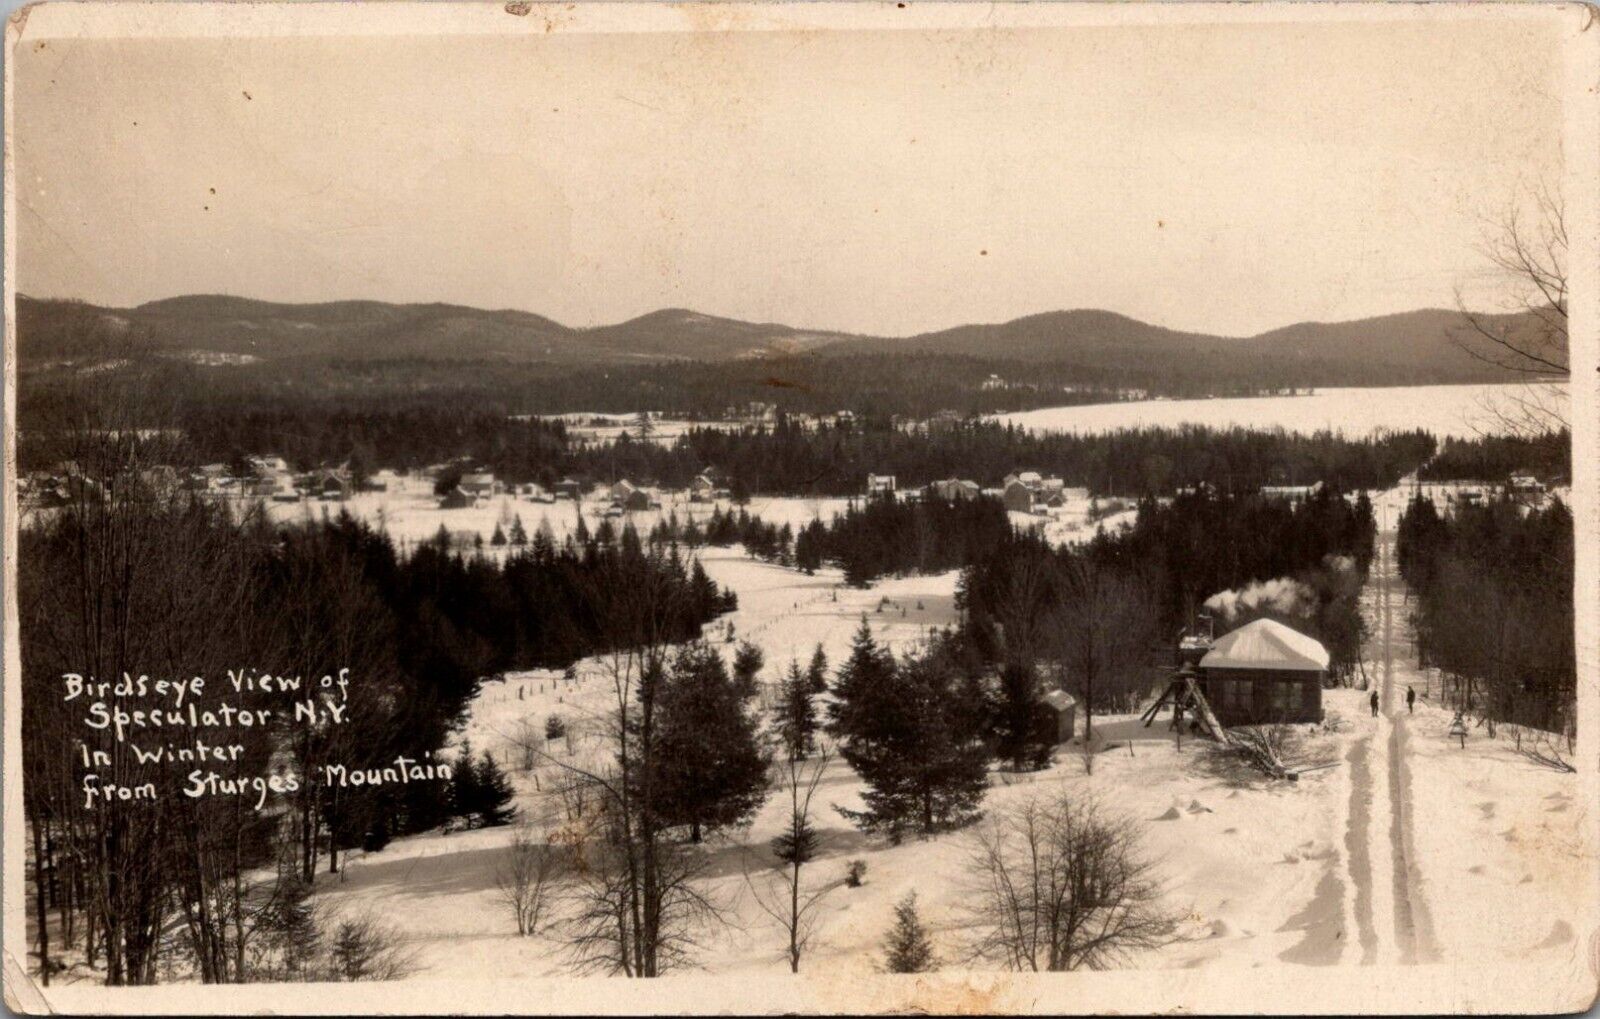 Postcard NY Speculator-New York Birdseye View in Winter from Sturges Mtn RPPC Bb